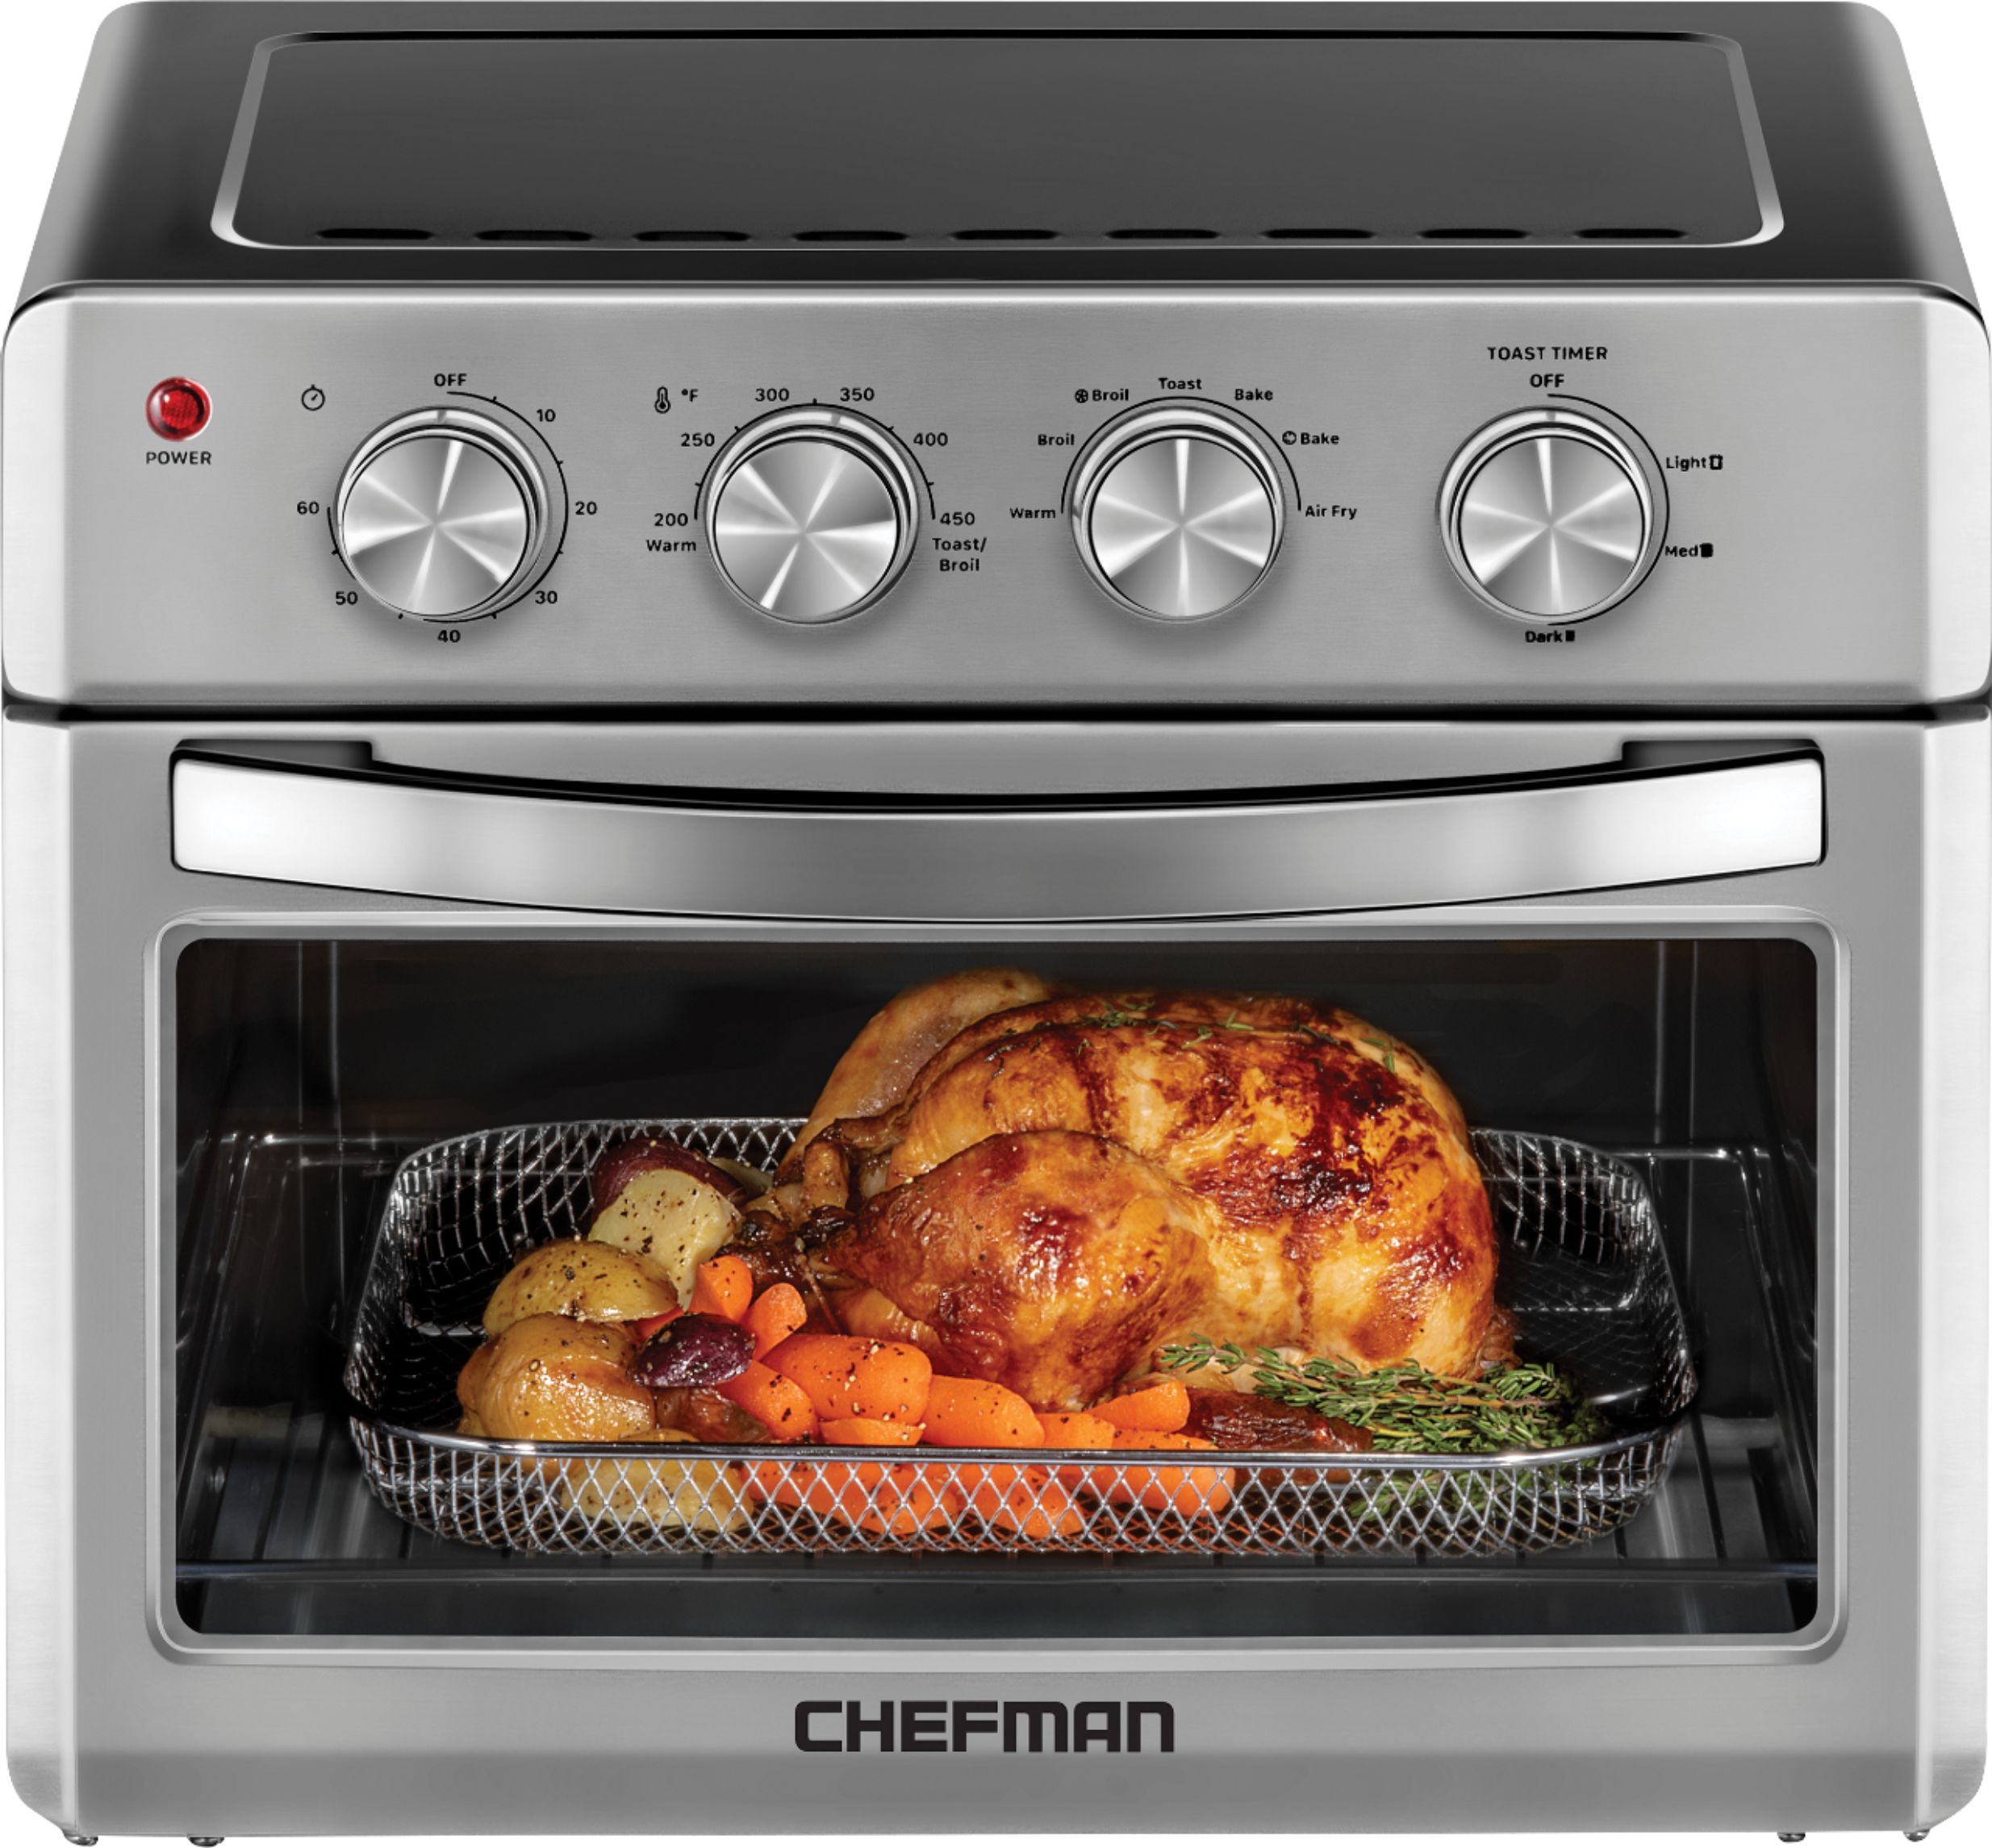 Chefman 25L Analog Air Fryer Toaster Oven 6 Slice Convection Auto Shut-Off 965 